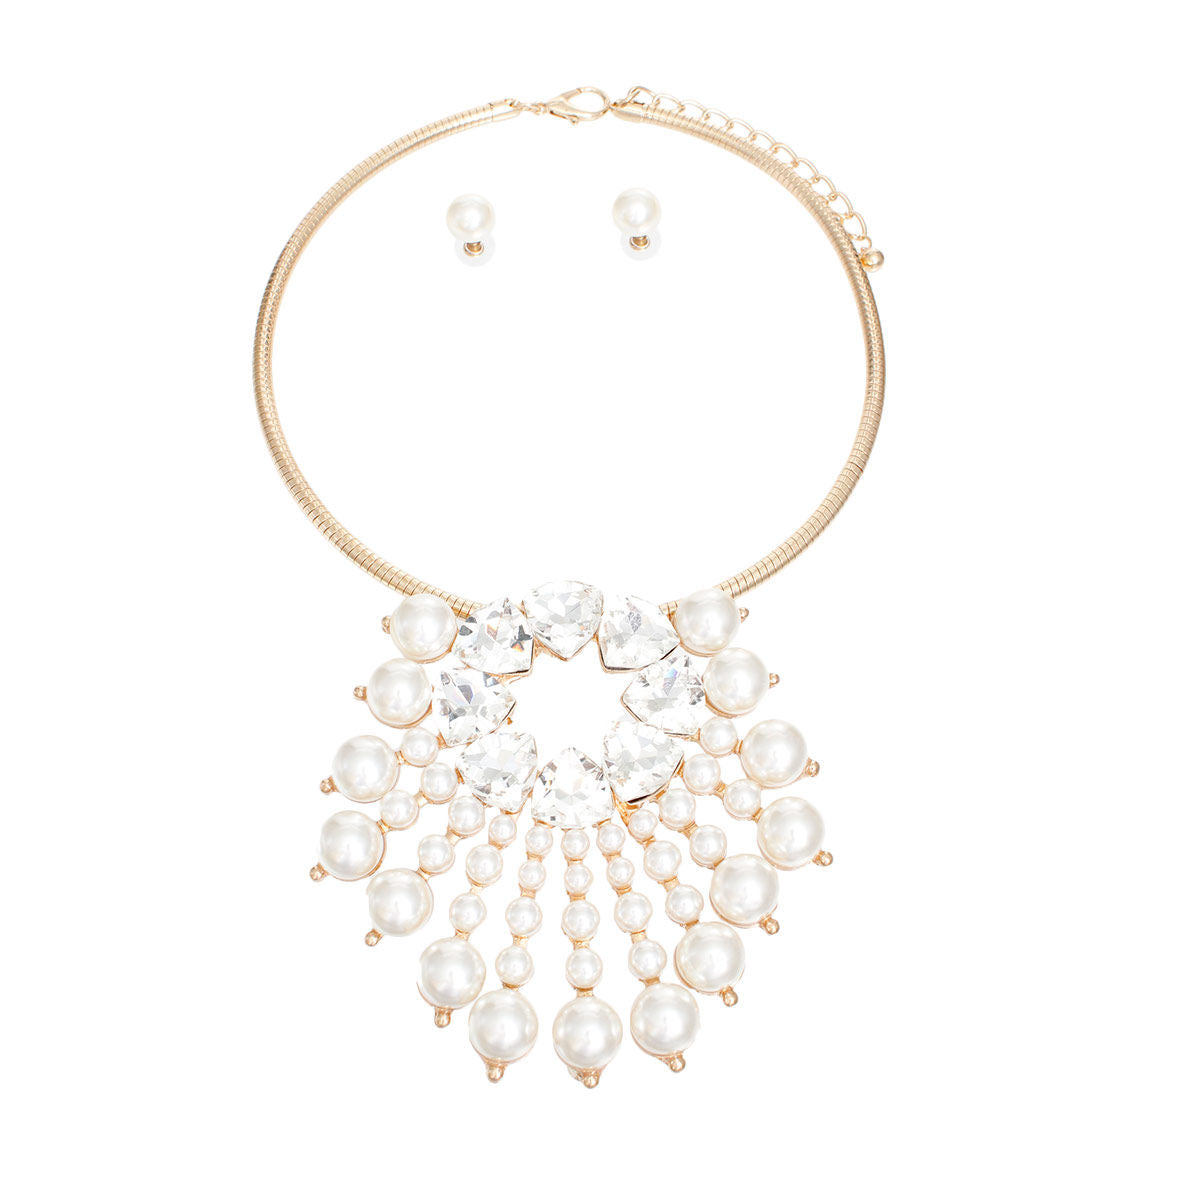 Gold Collar and Sunburst Pearl Necklace